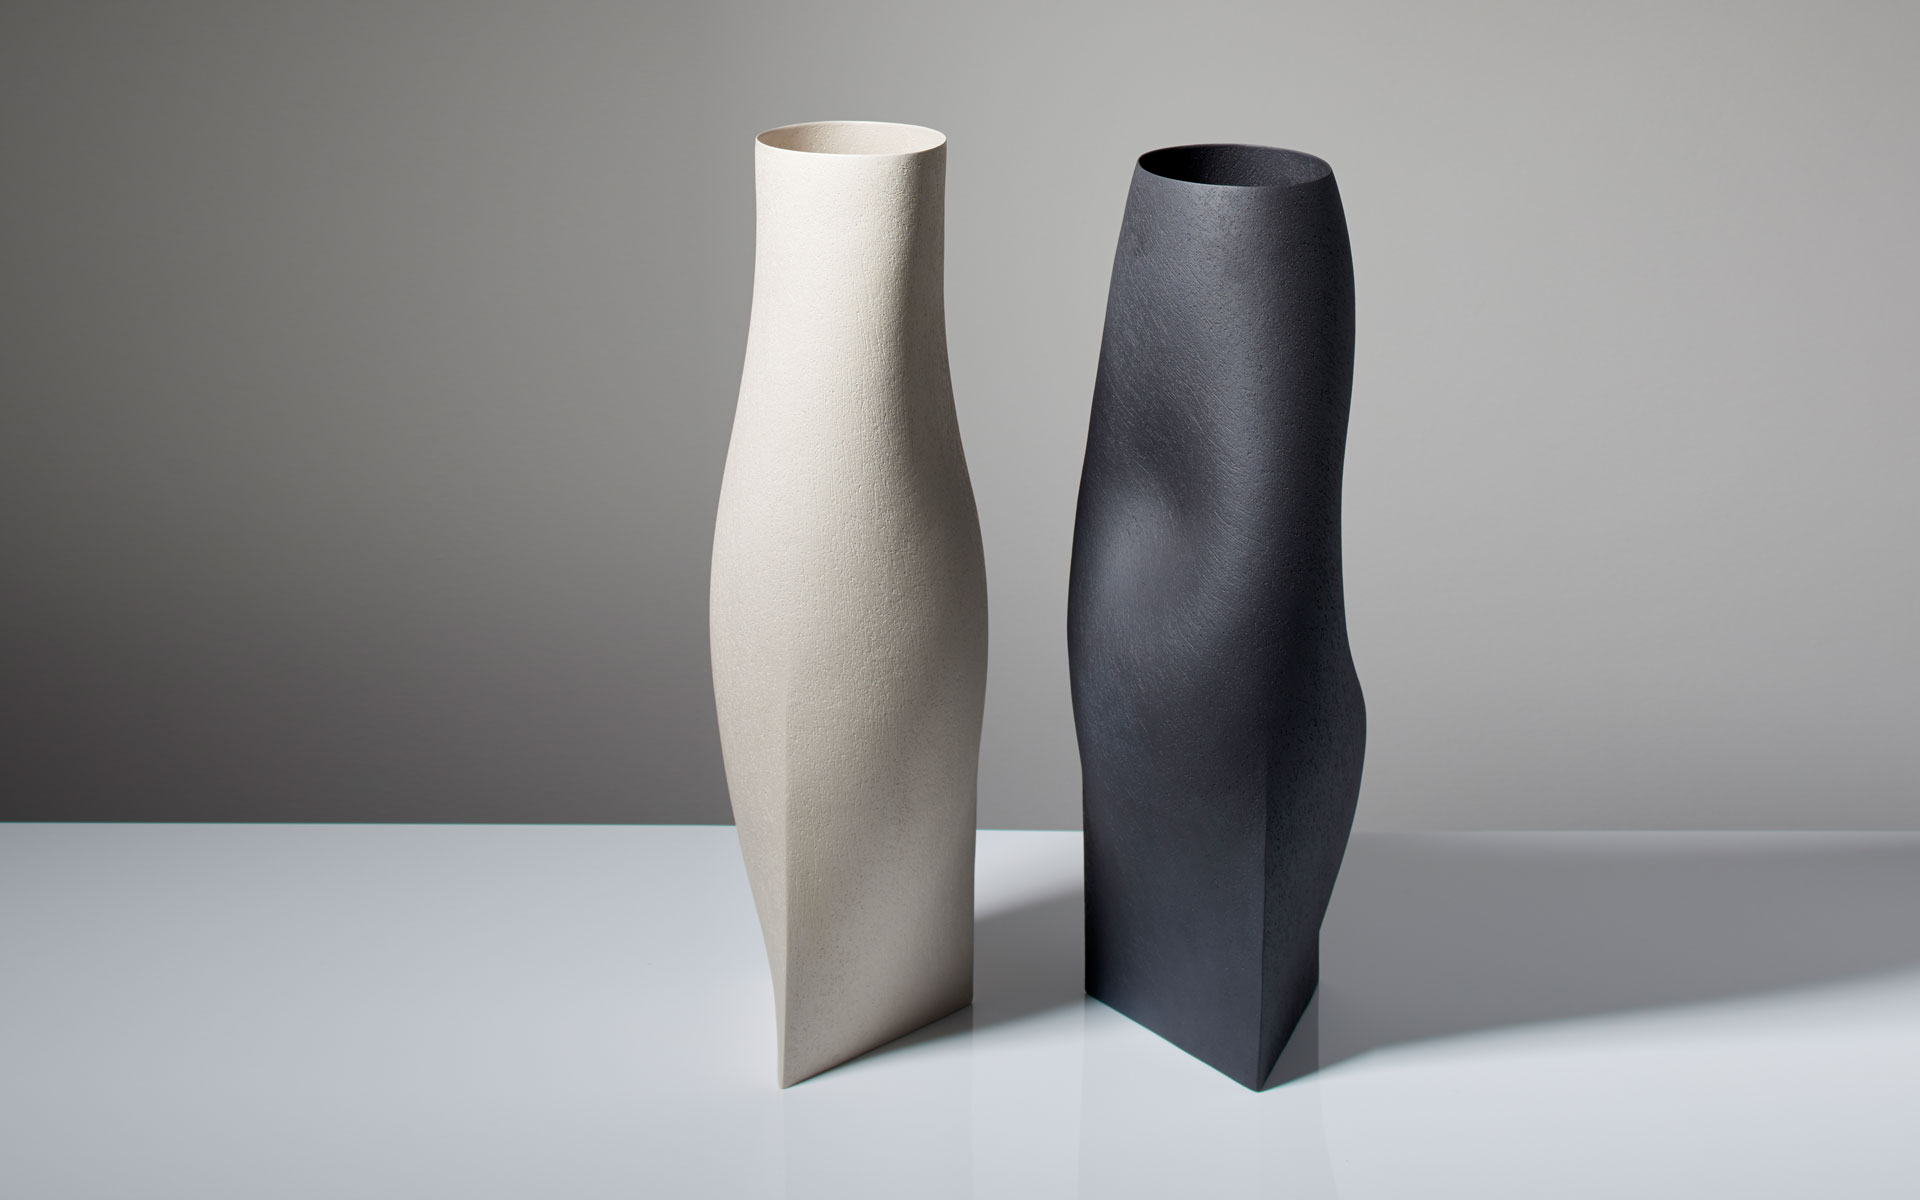 Black and Grey Vessels